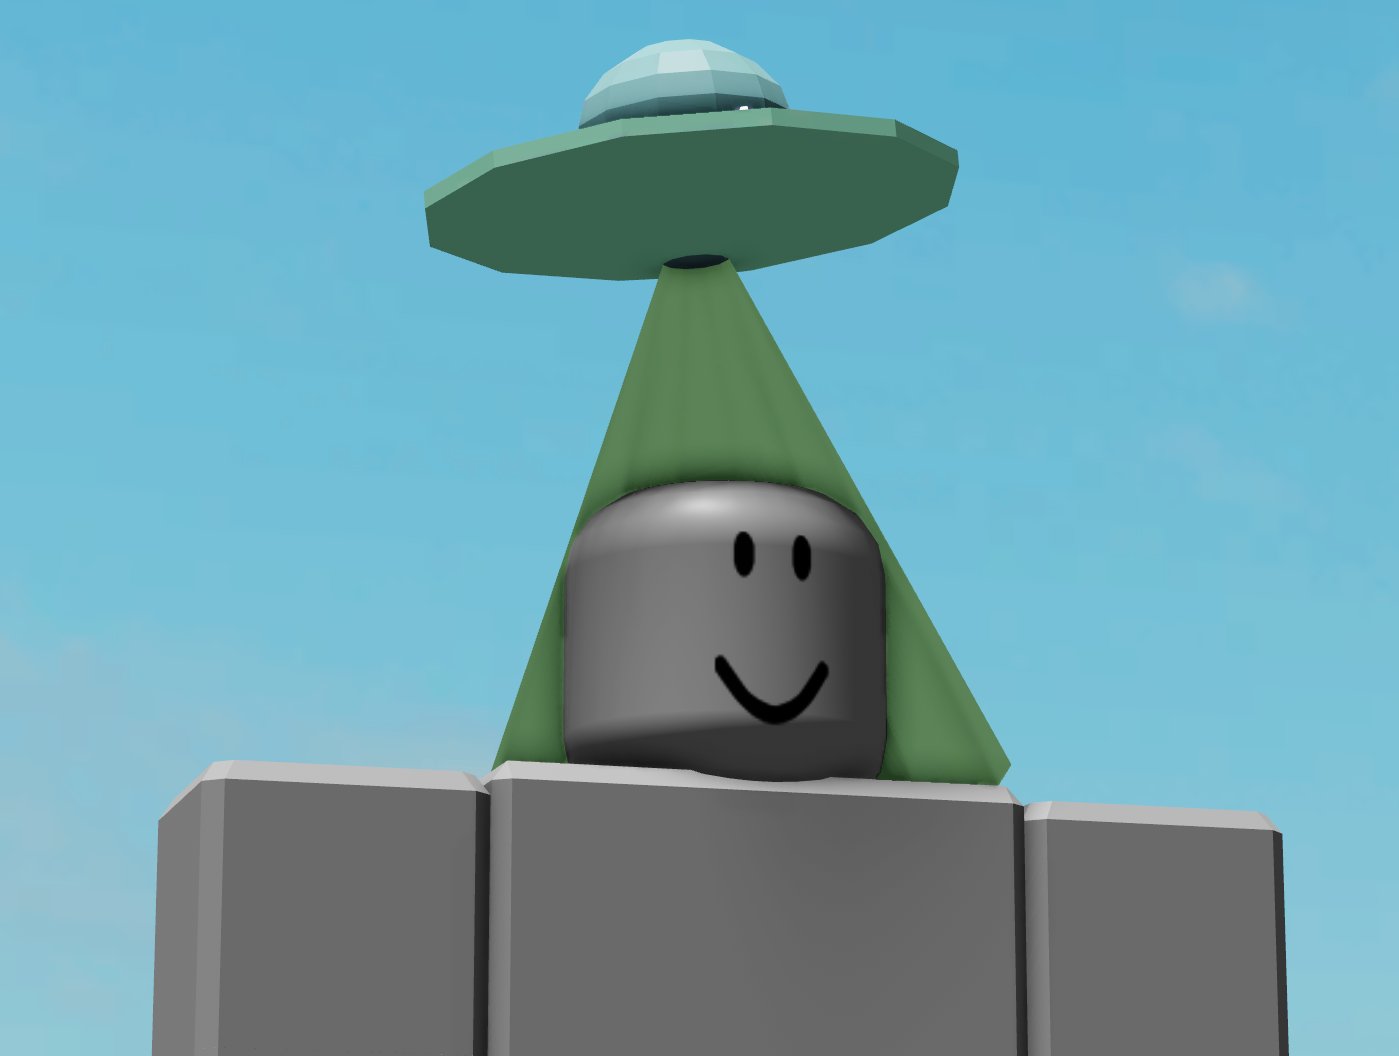 Schlep on X: roblox simulators are officially out of control